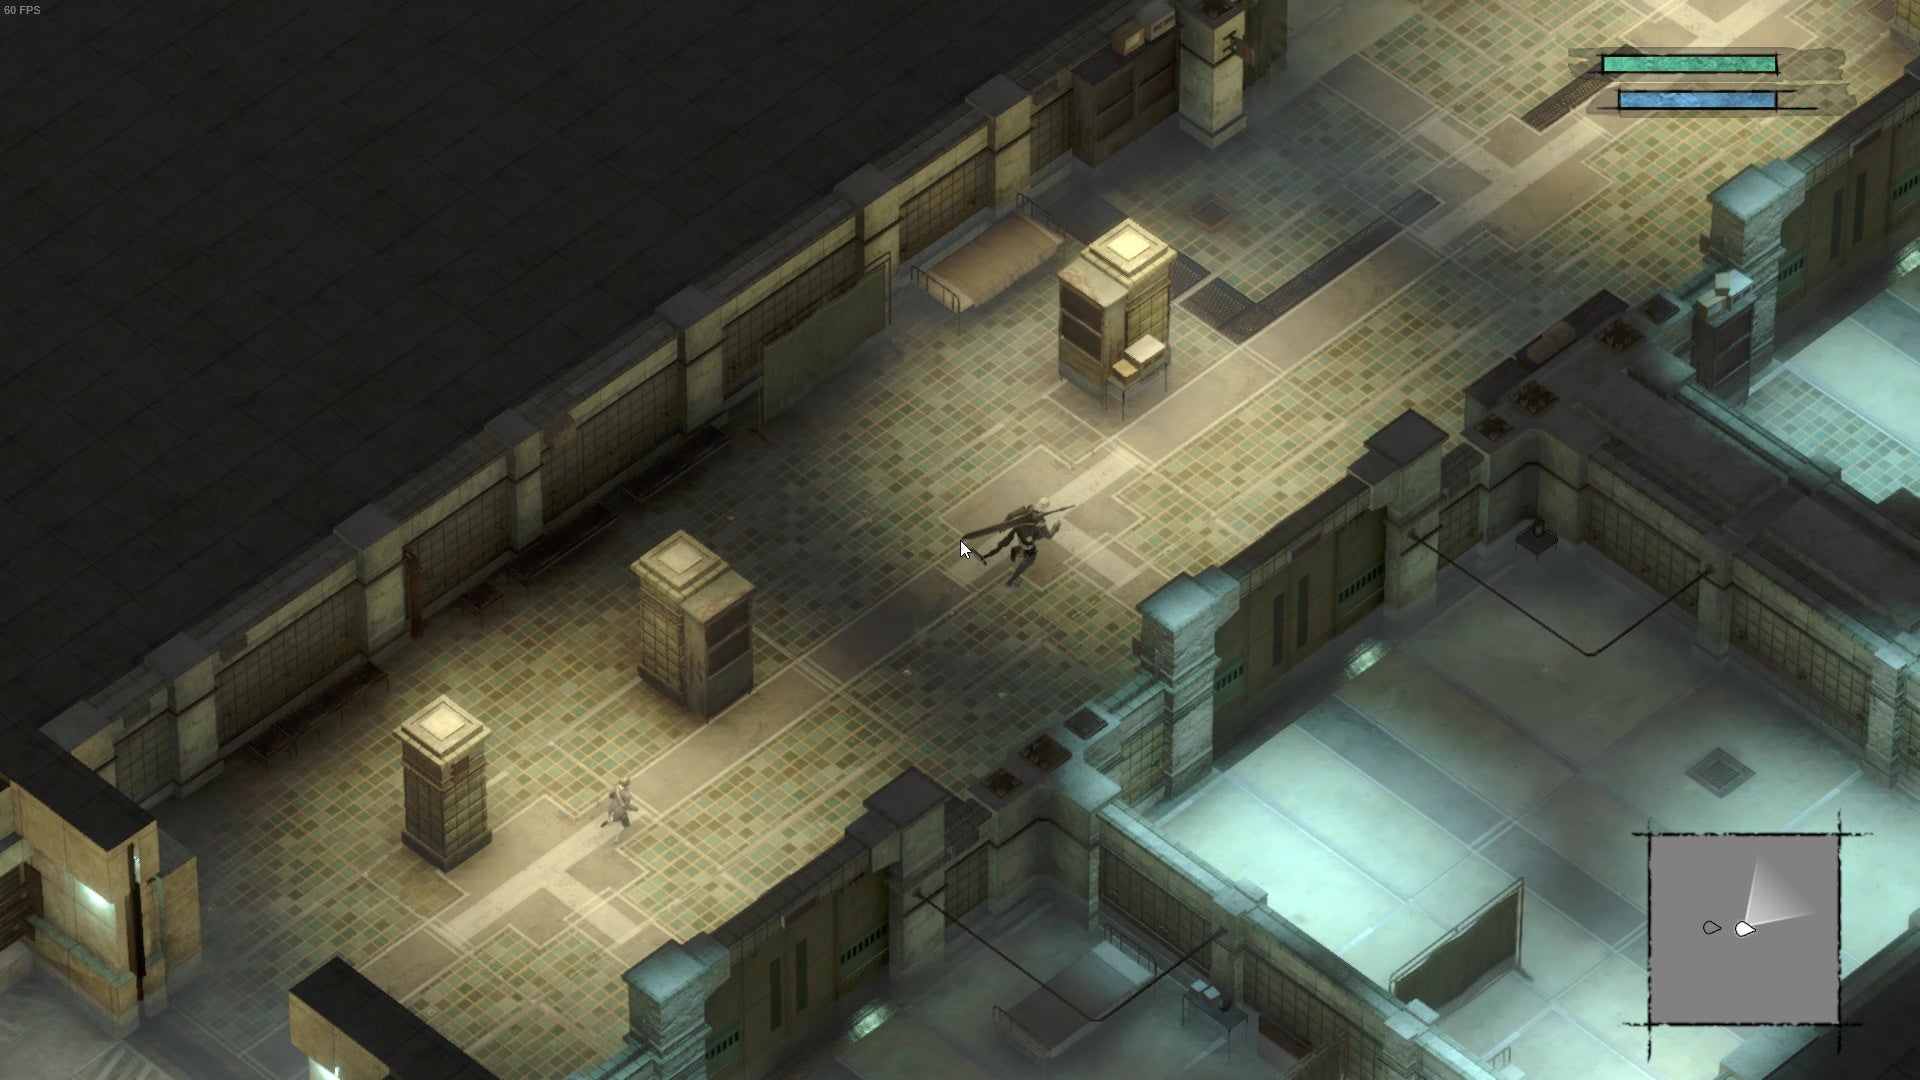 A top down view of NieR Replicant which shows me exploring a cold, grey facility of some kind.